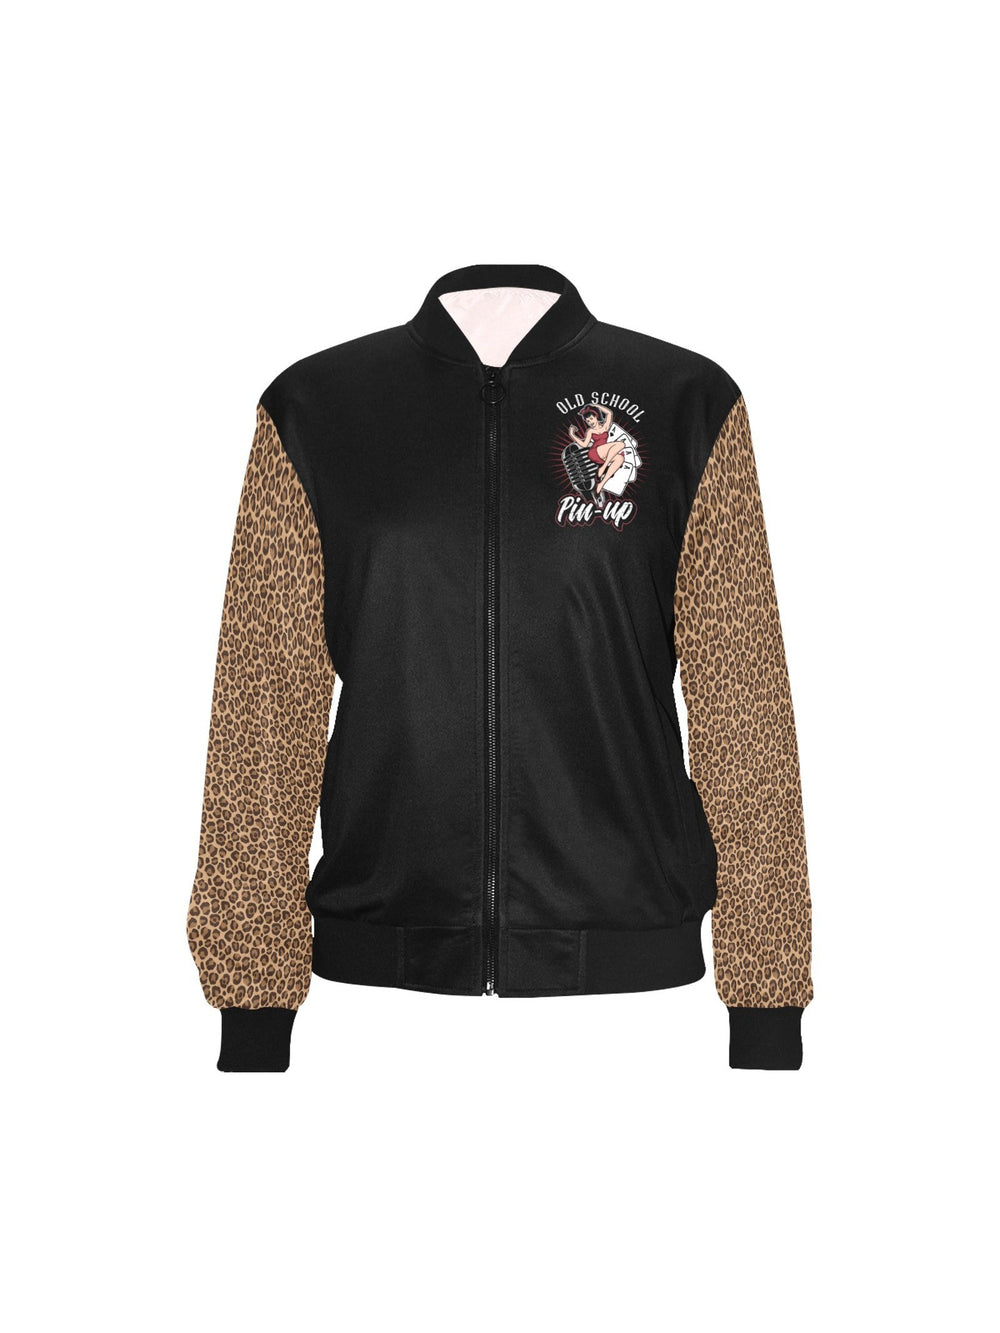 Old School Pinup Womens Bomber Jacket